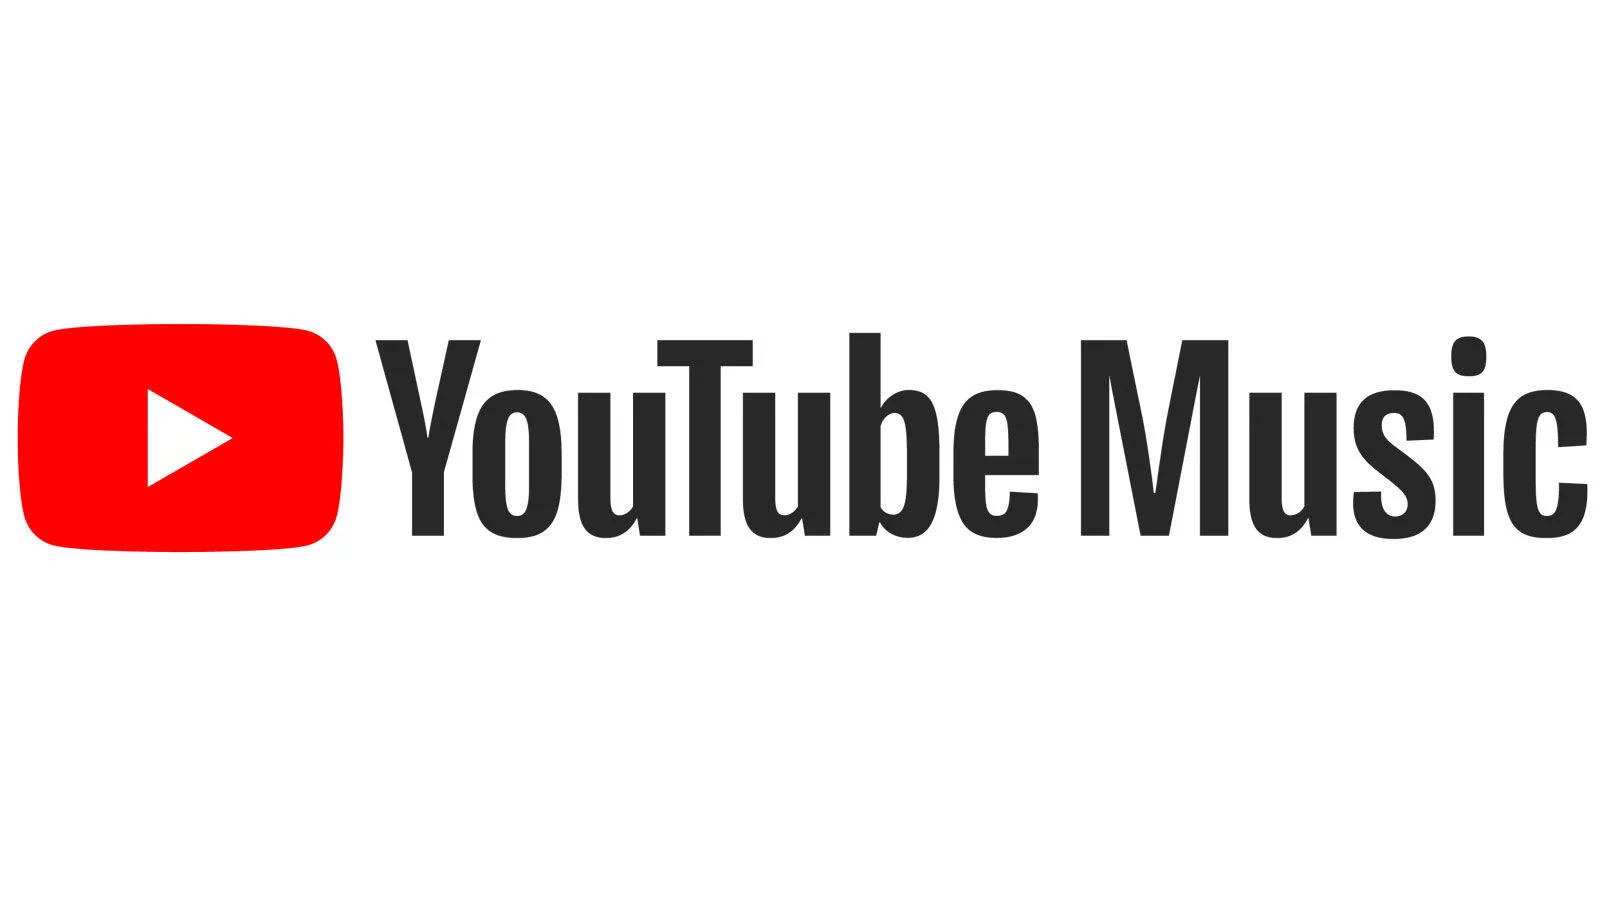 YouTube has paid out nearly $2 billion for music in the past year